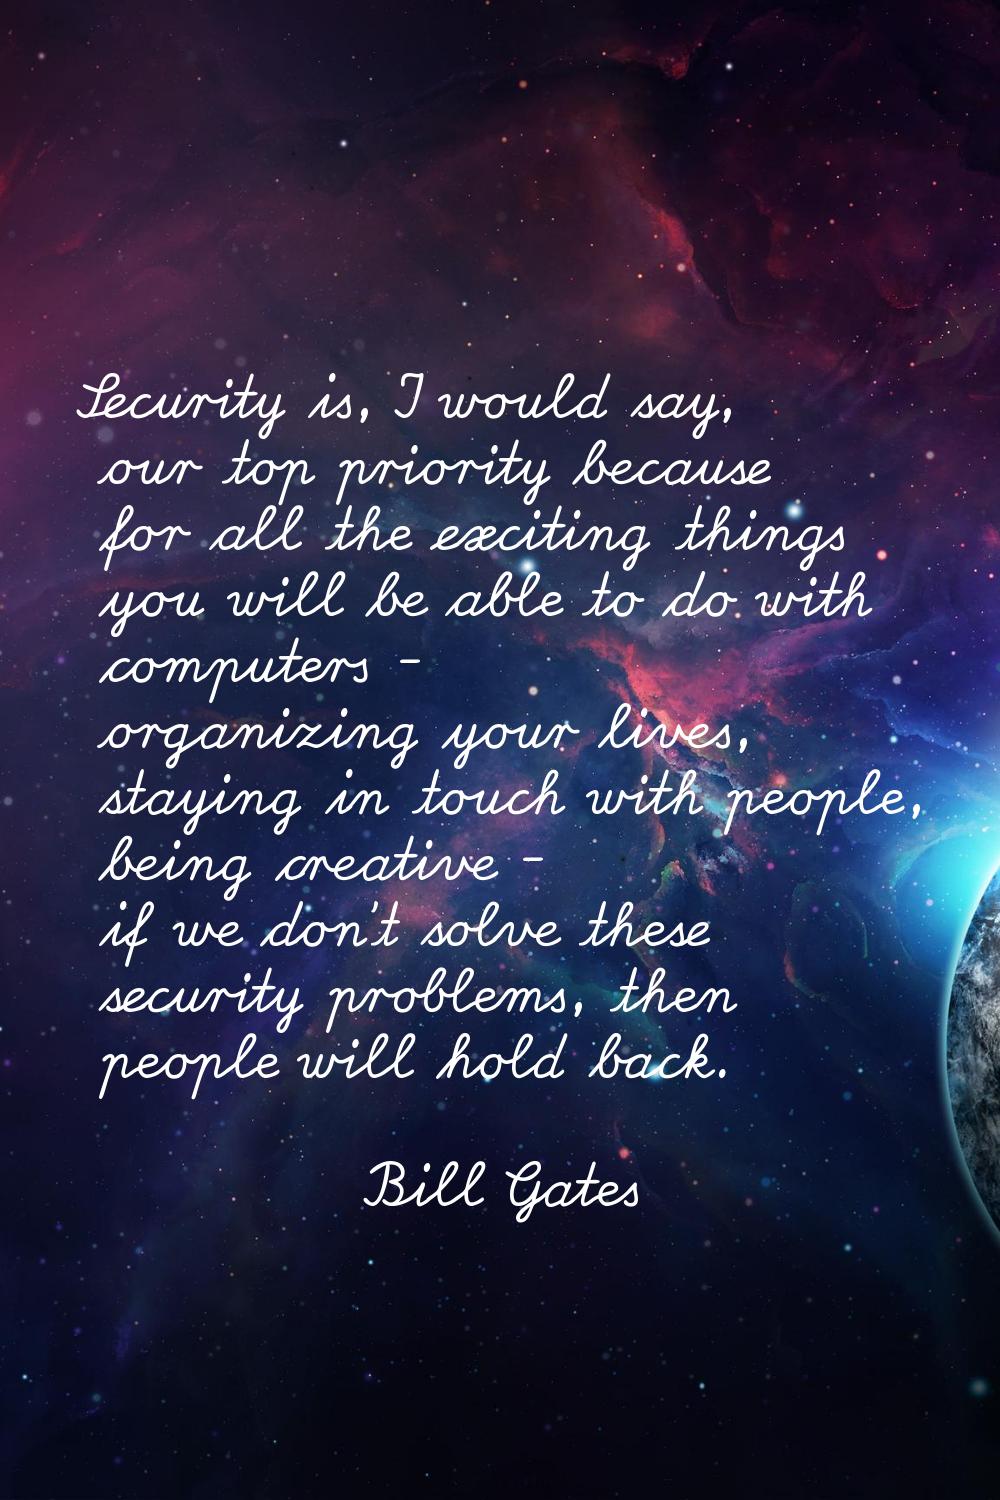 Security is, I would say, our top priority because for all the exciting things you will be able to 